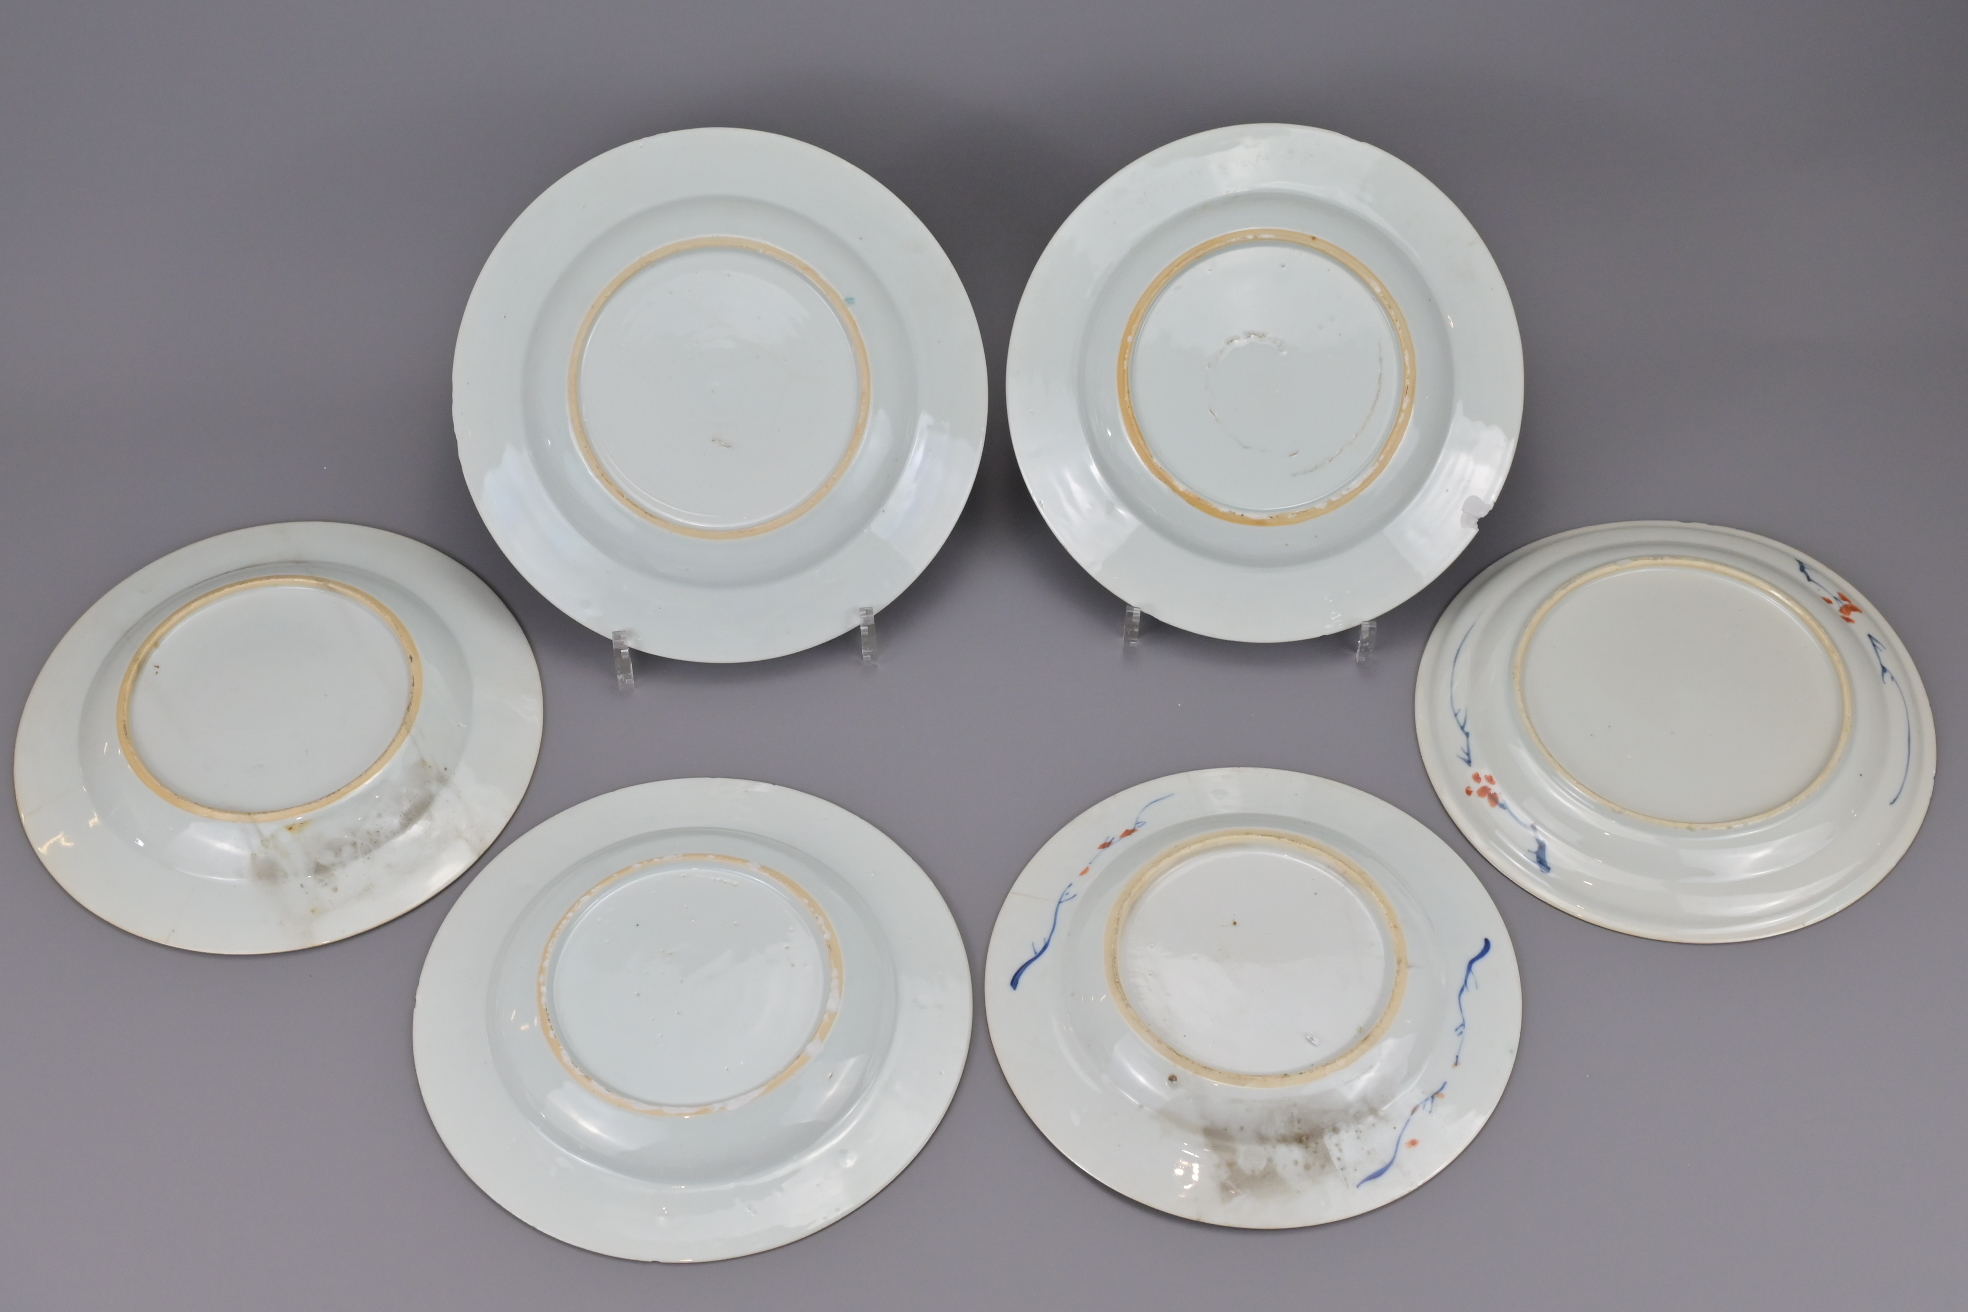 SIX CHINESE FAMILLE ROSE EXPORT PORCELAIN PLATES - Image 4 of 7